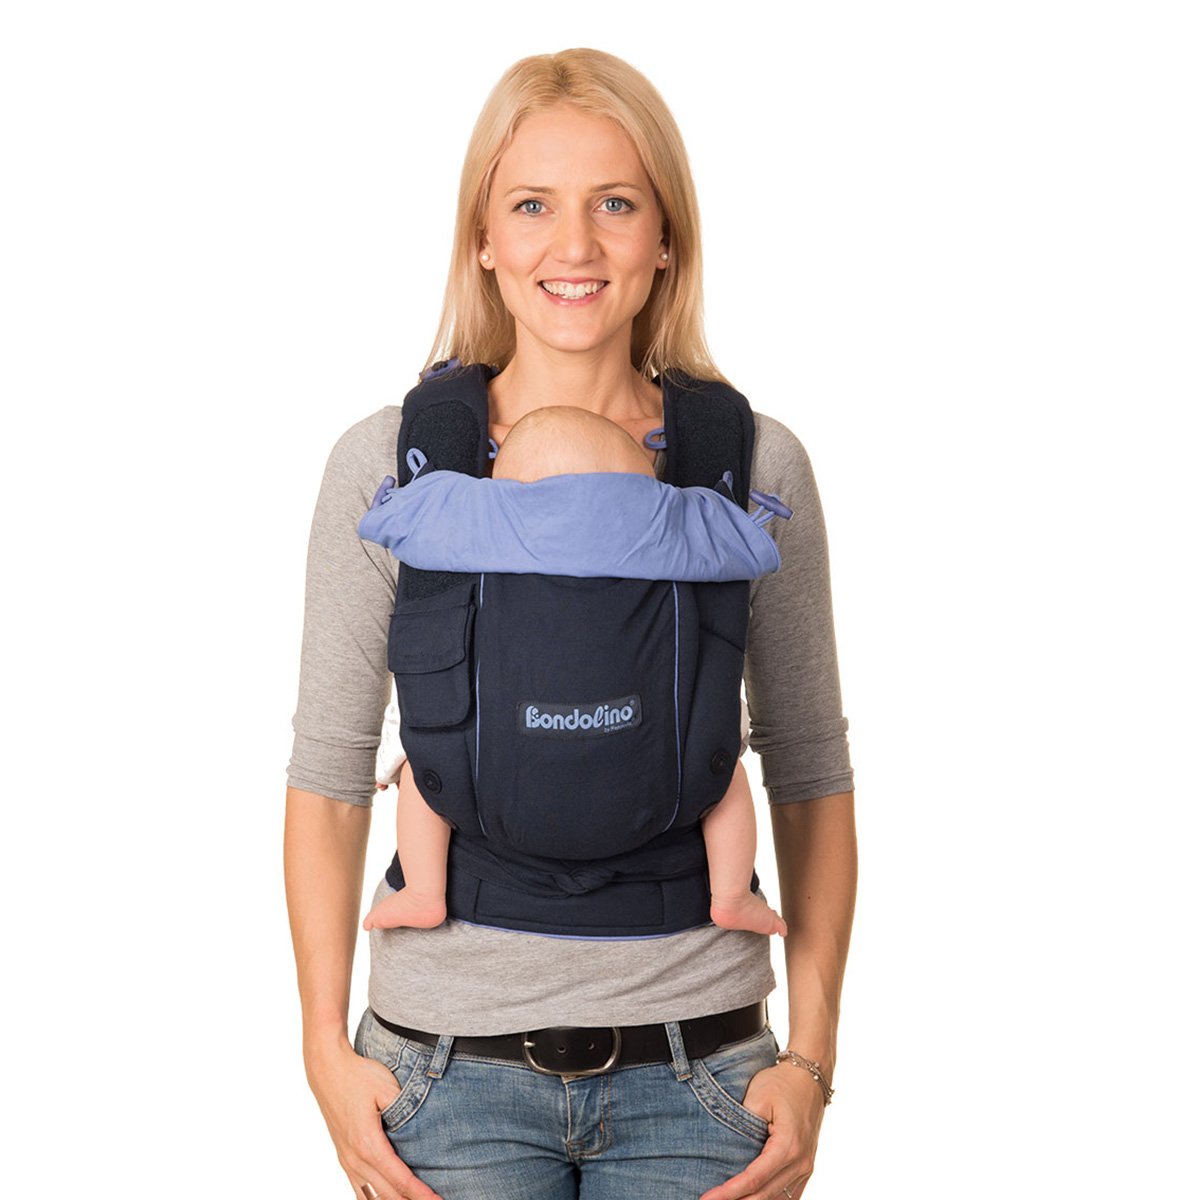 Bondolino Baby Carrier with Tying Instructions, Slim Fit Navy